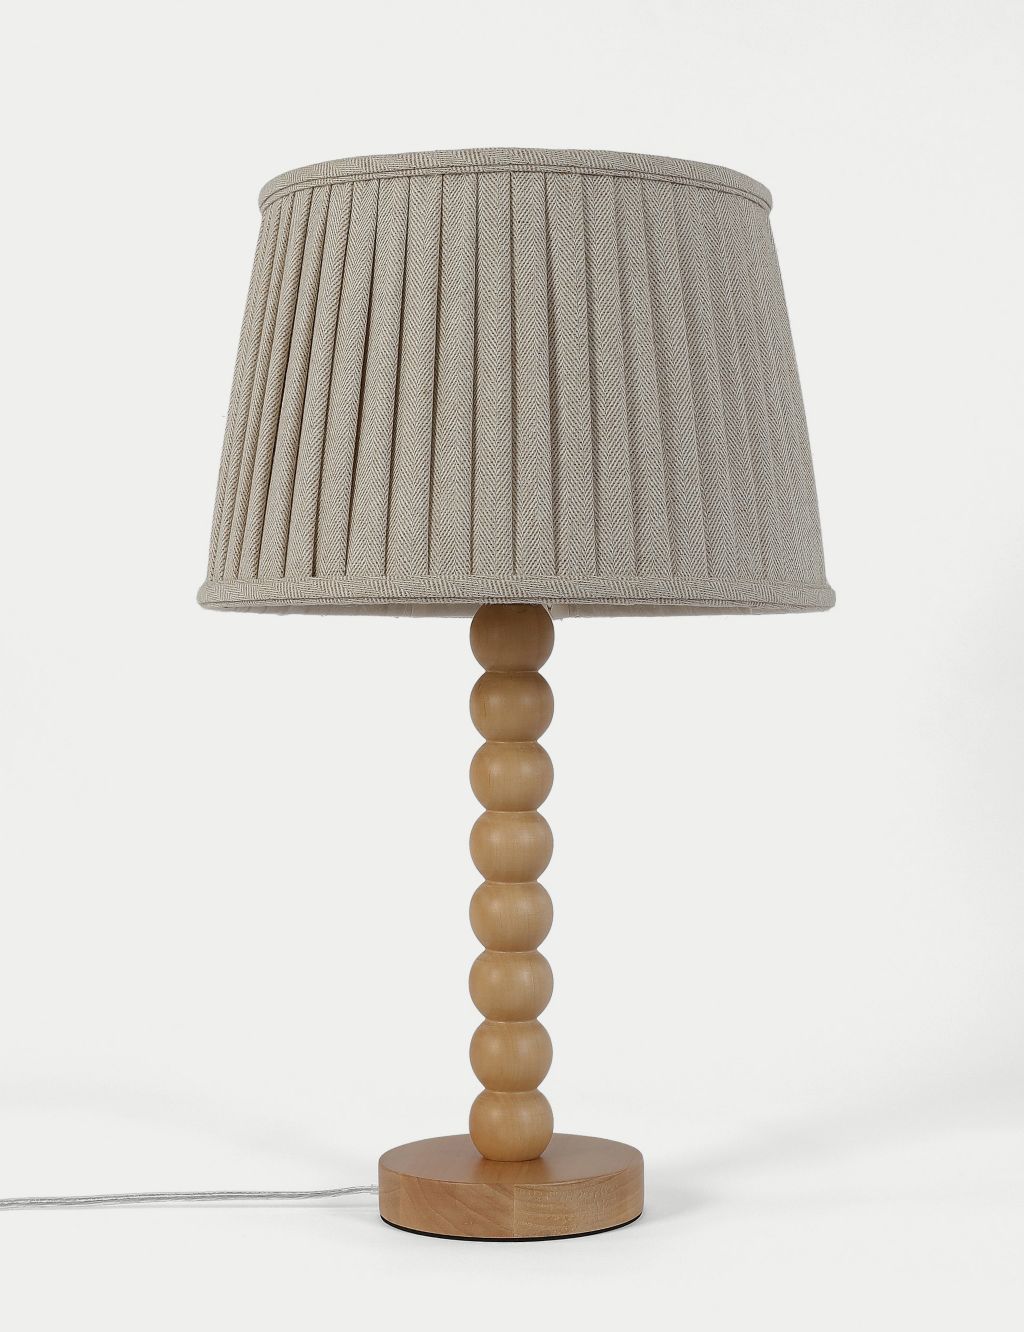 Tilly Table Lamp